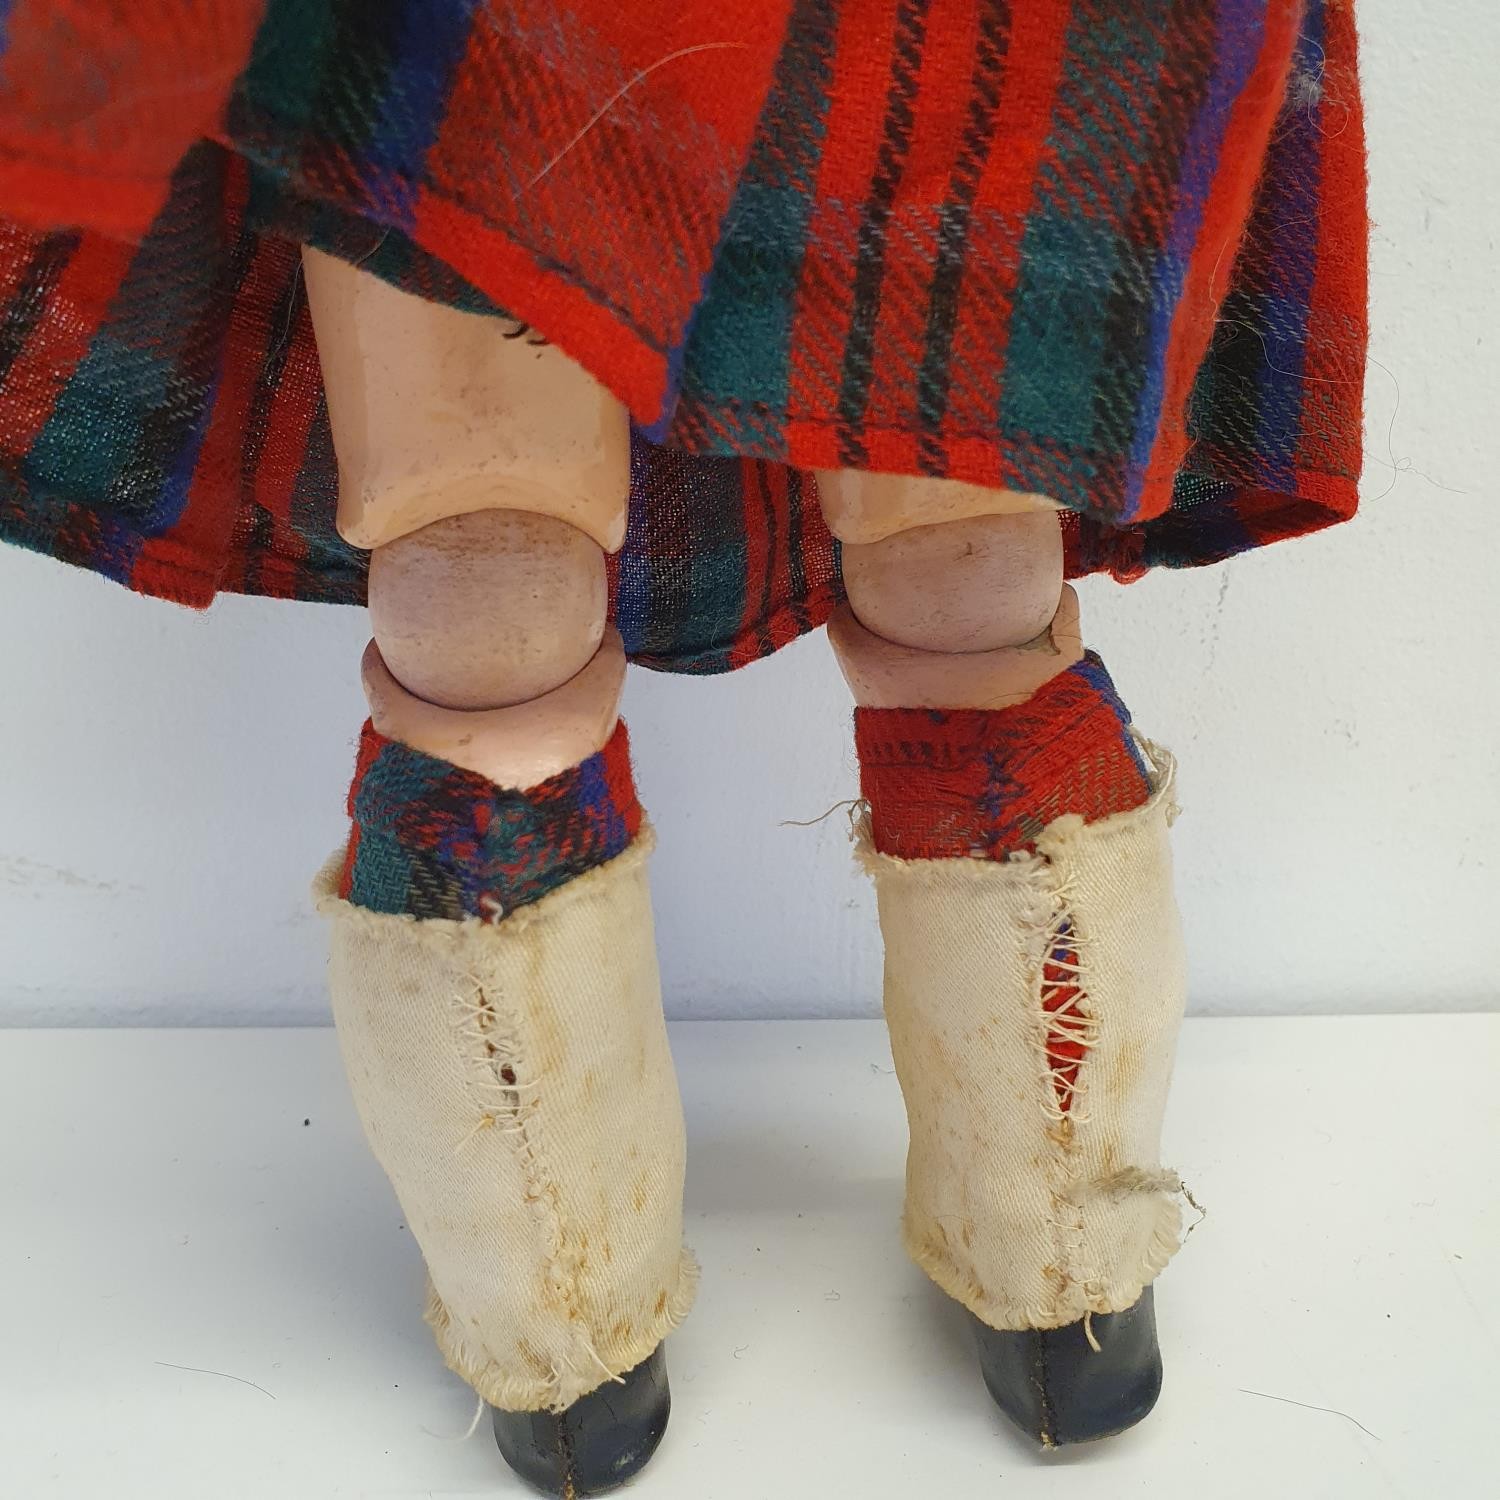 An Armand Marseille German bisque headed Scottish Boy doll, No 390, with a jointed composite body, - Image 4 of 7